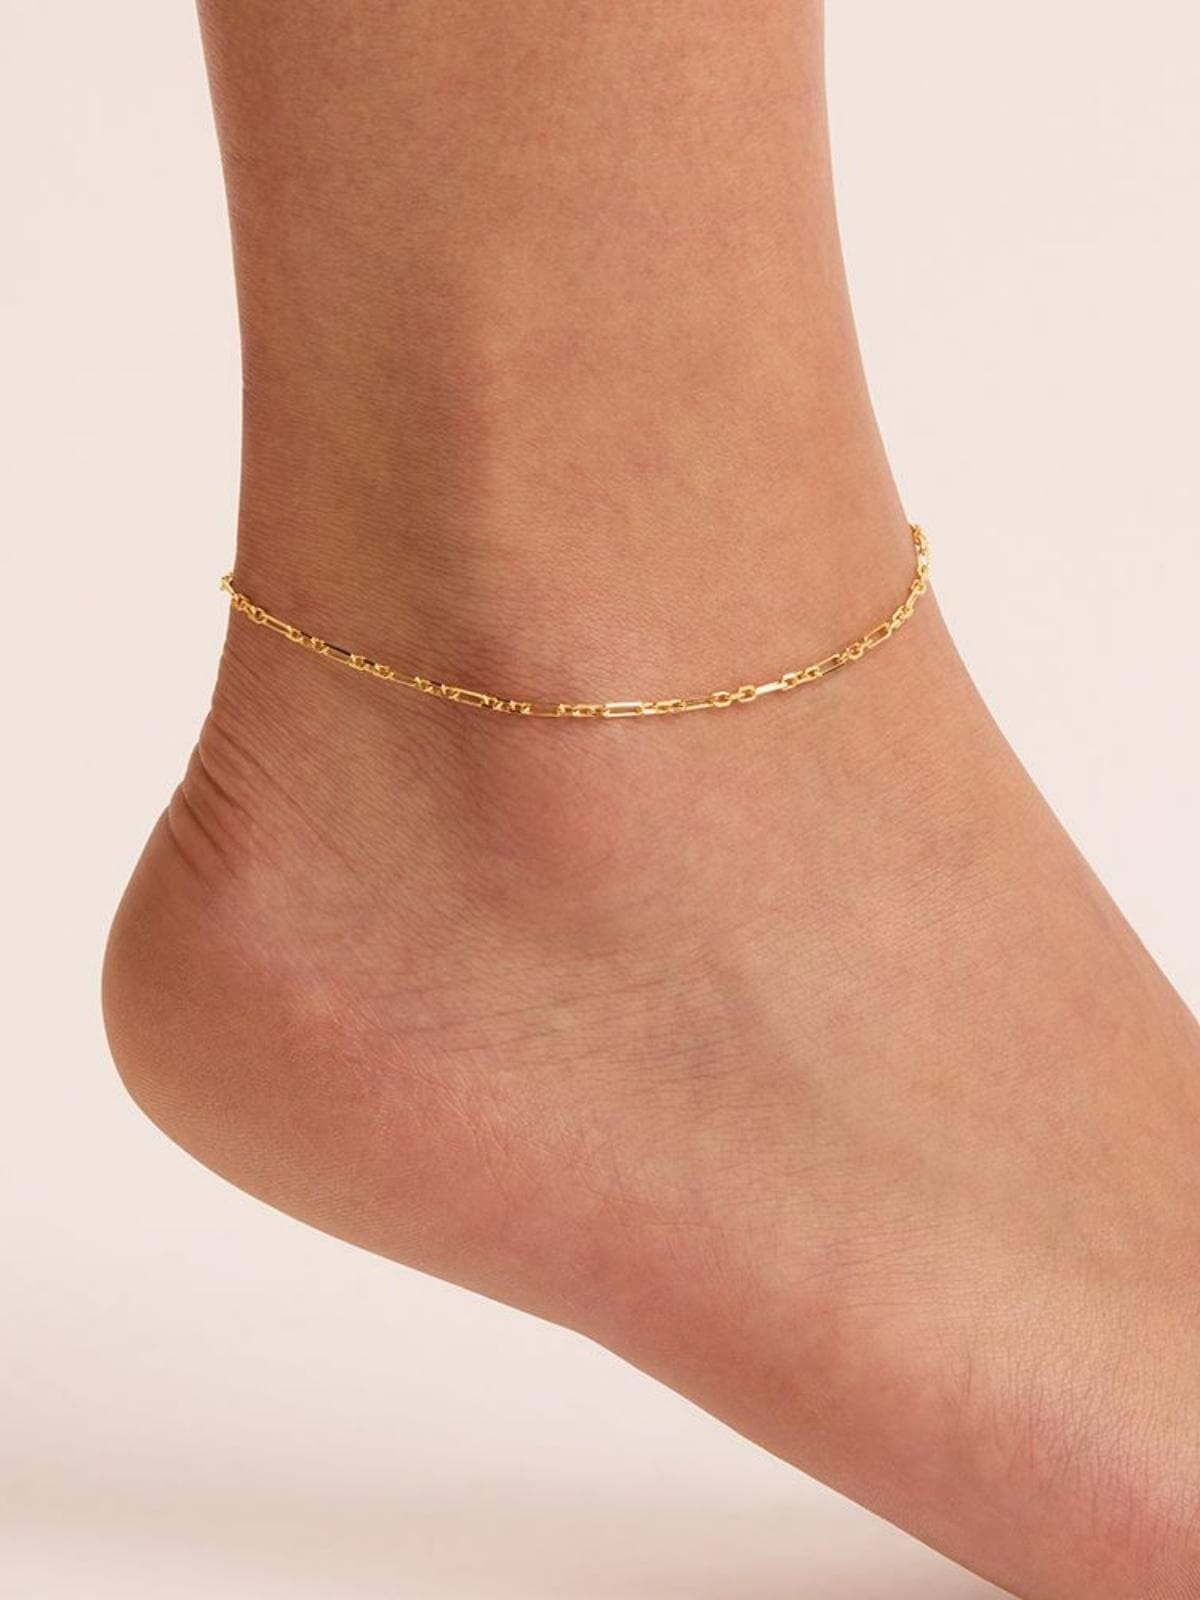 By Charlotte | Mixed Link Chain Anklet - Gold | Perlu